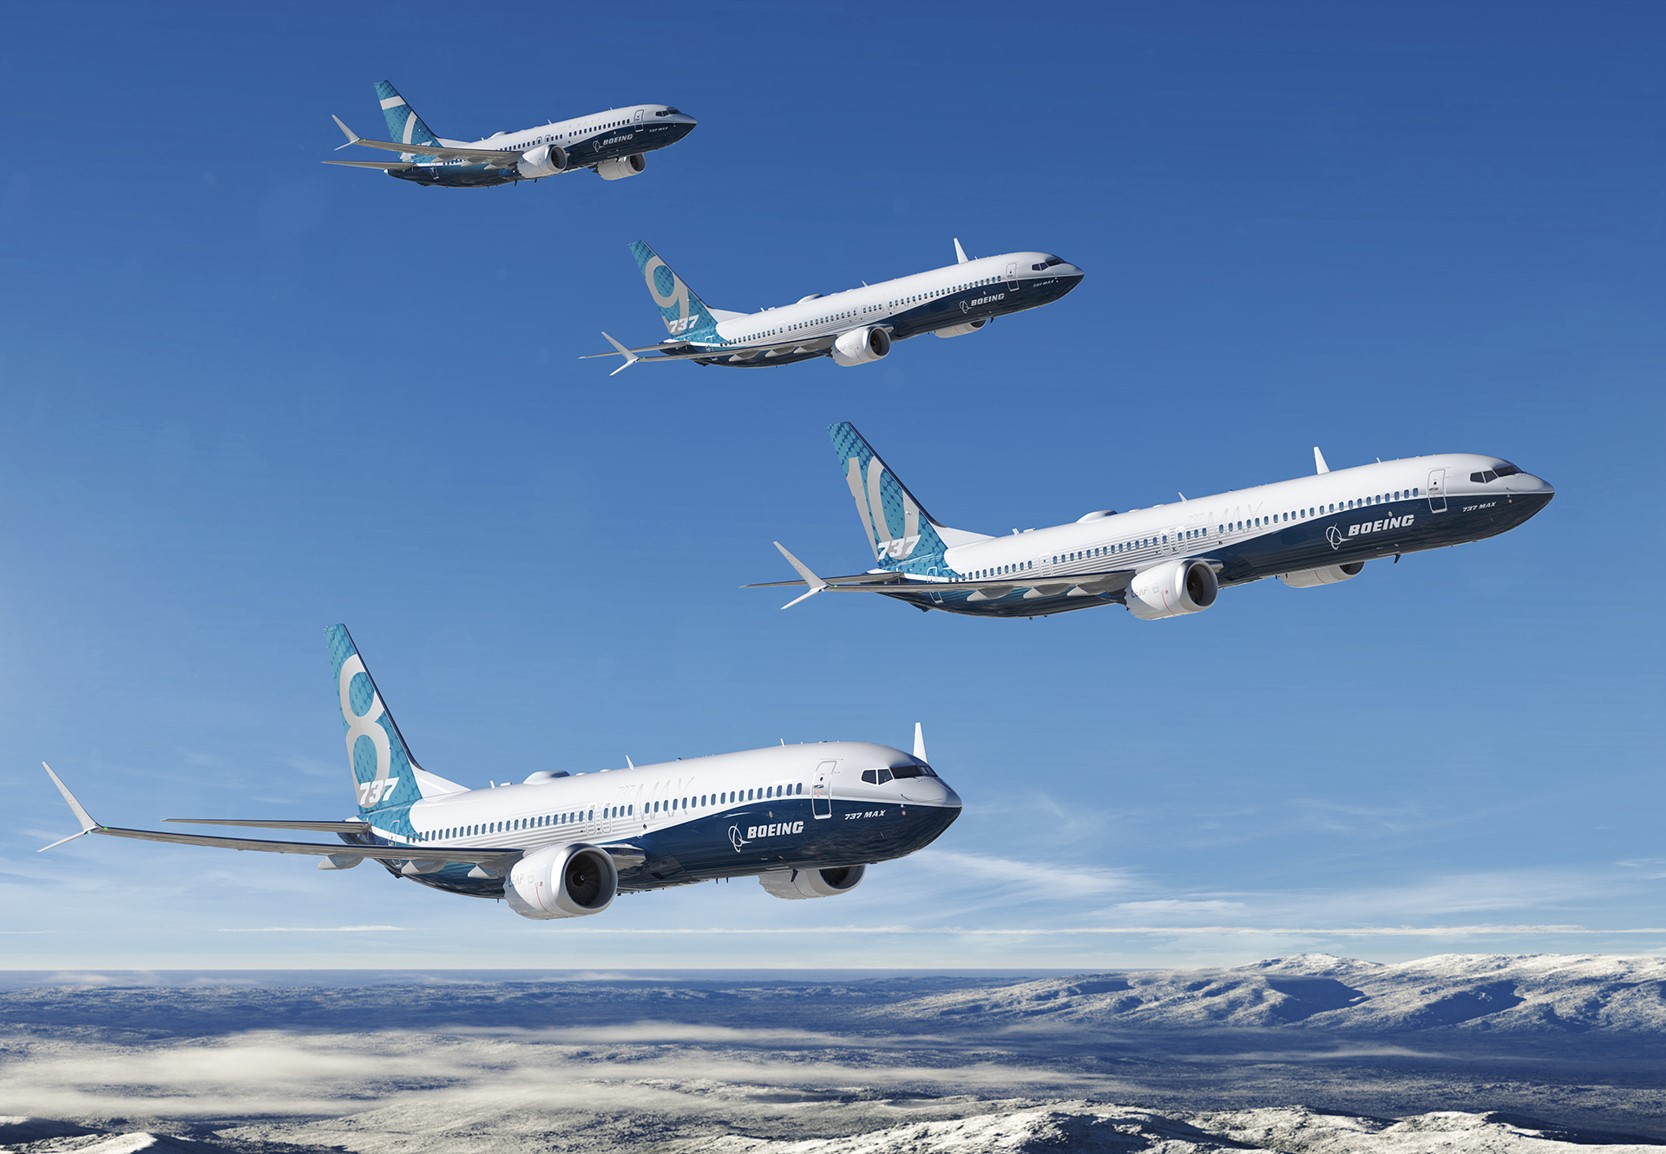 FAA Administrator completes Boeing 737 MAX flight